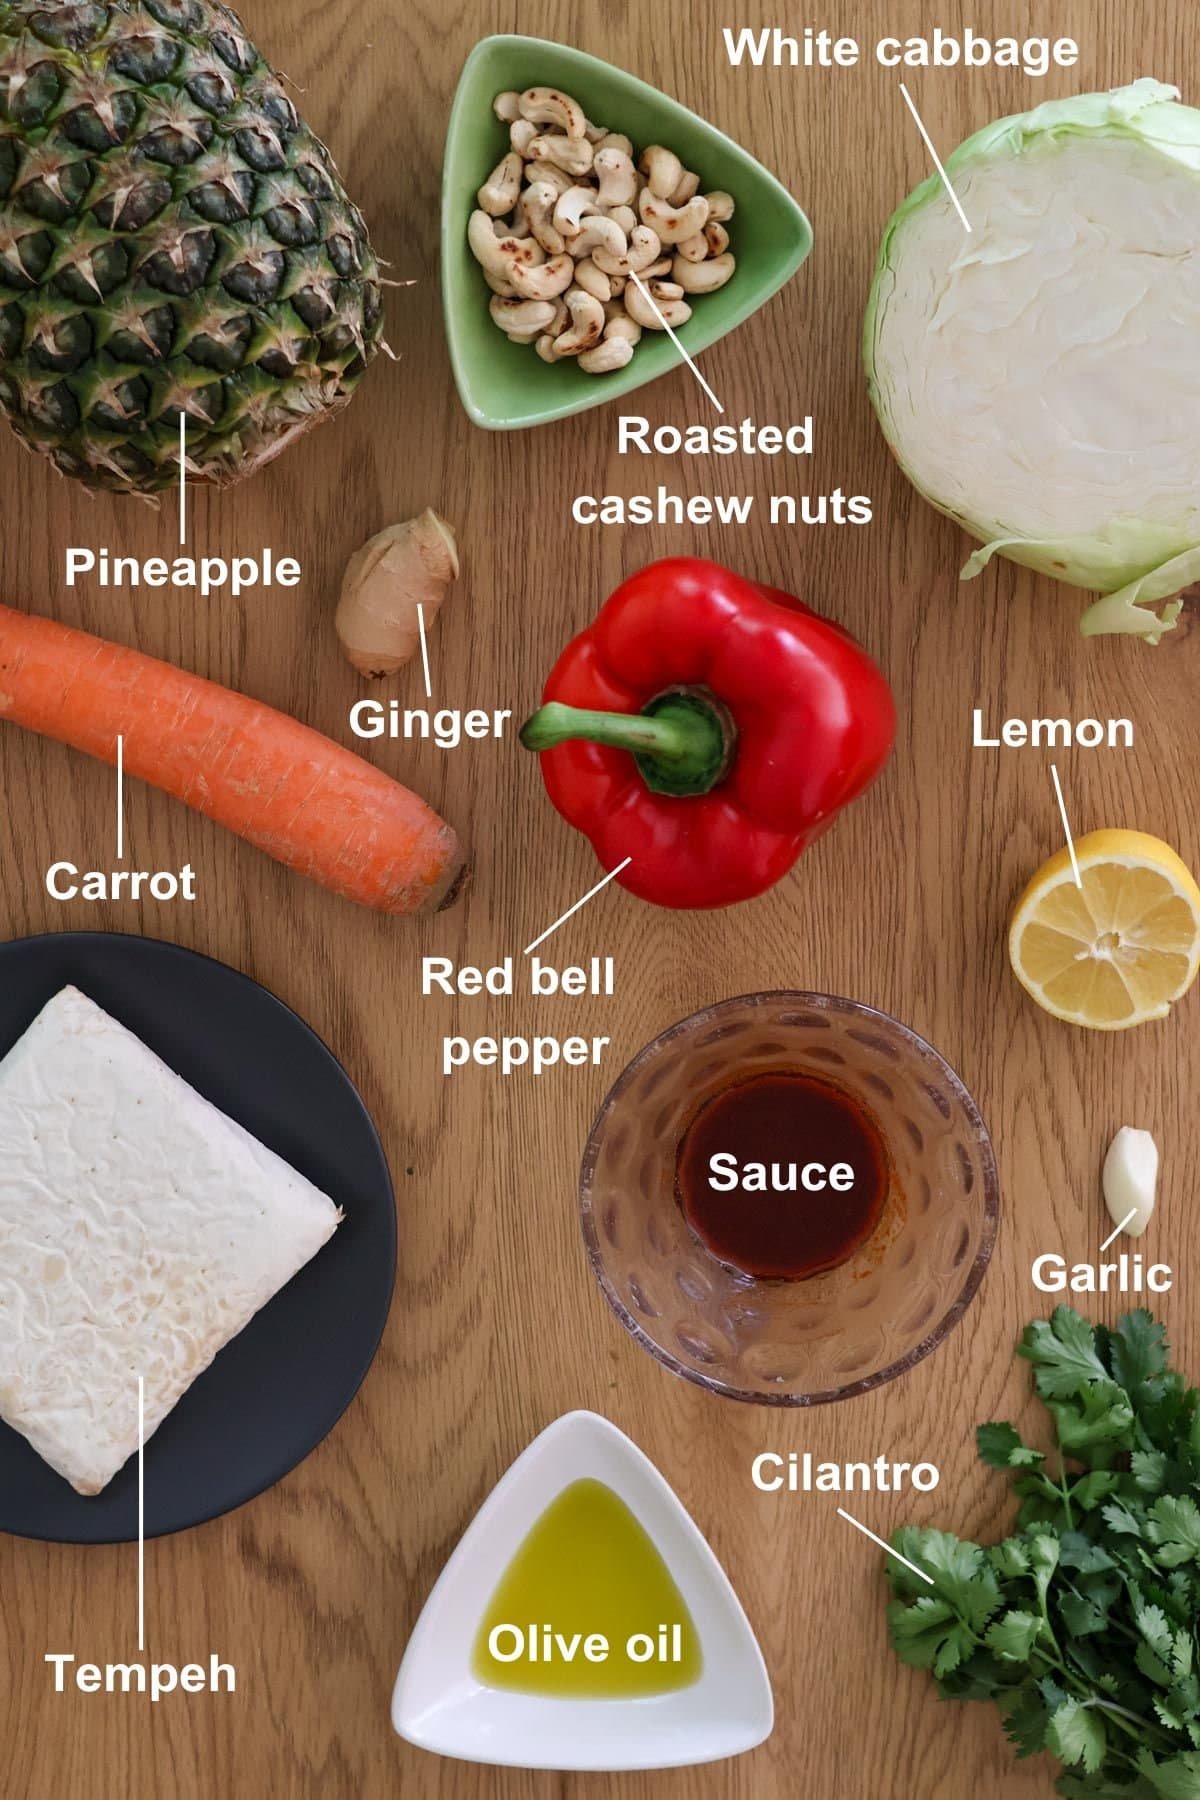 The ingredients for the recipe on a wooden table.